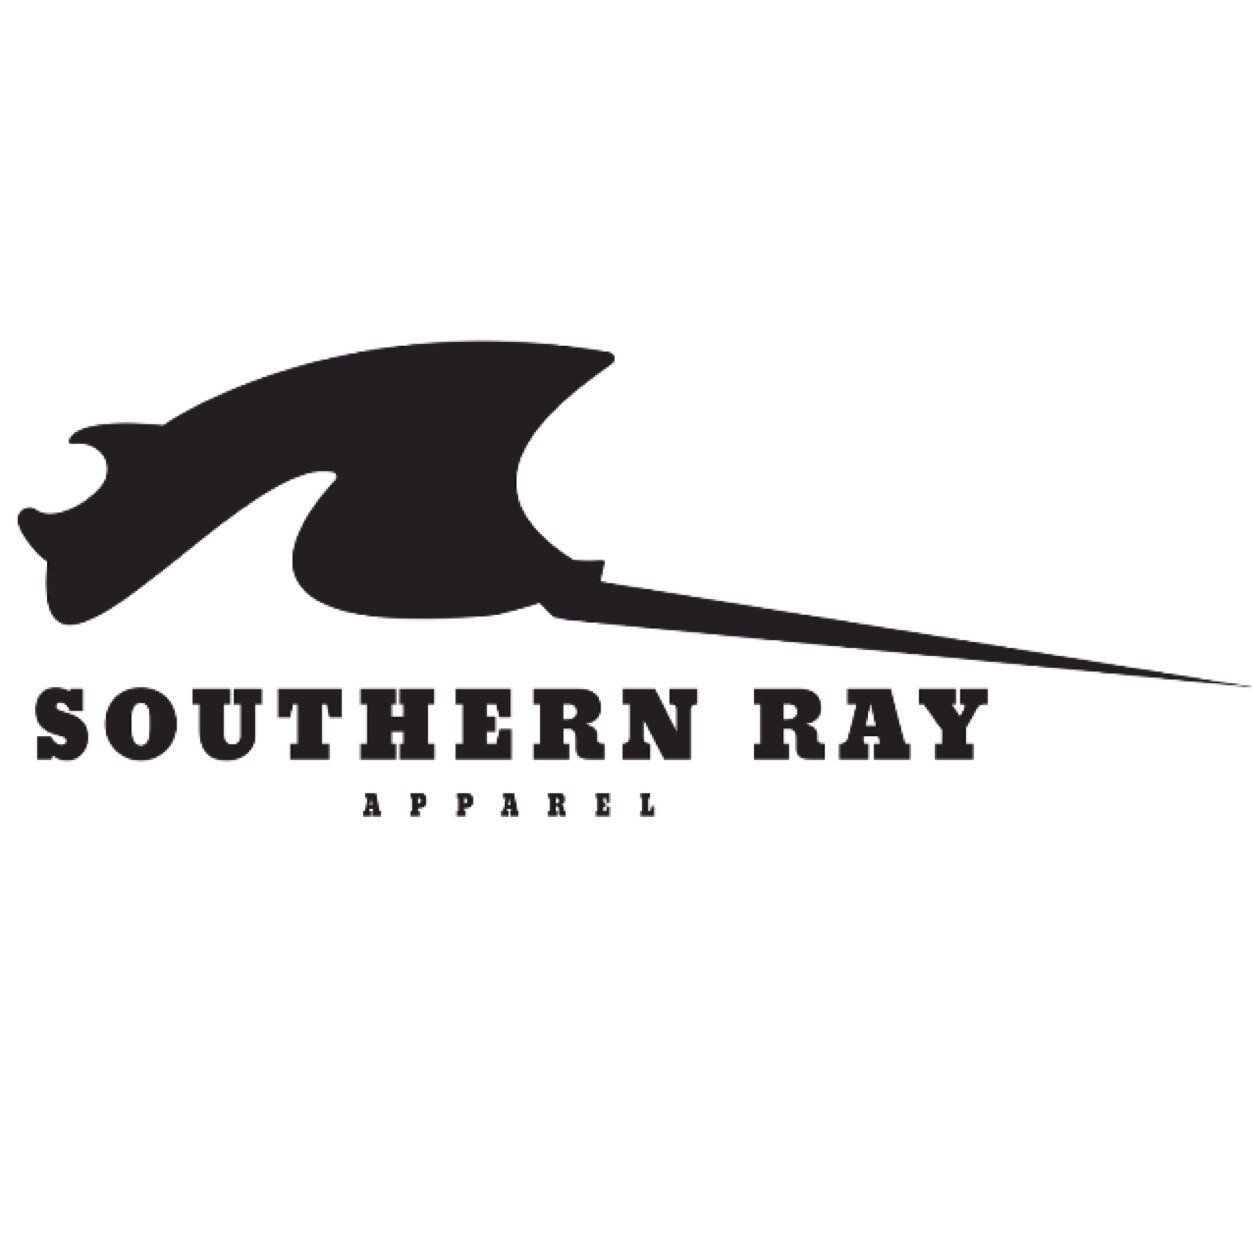 Official Twitter page for Southern Ray!
     
                Follow us today. 

               Apparel coming soon.